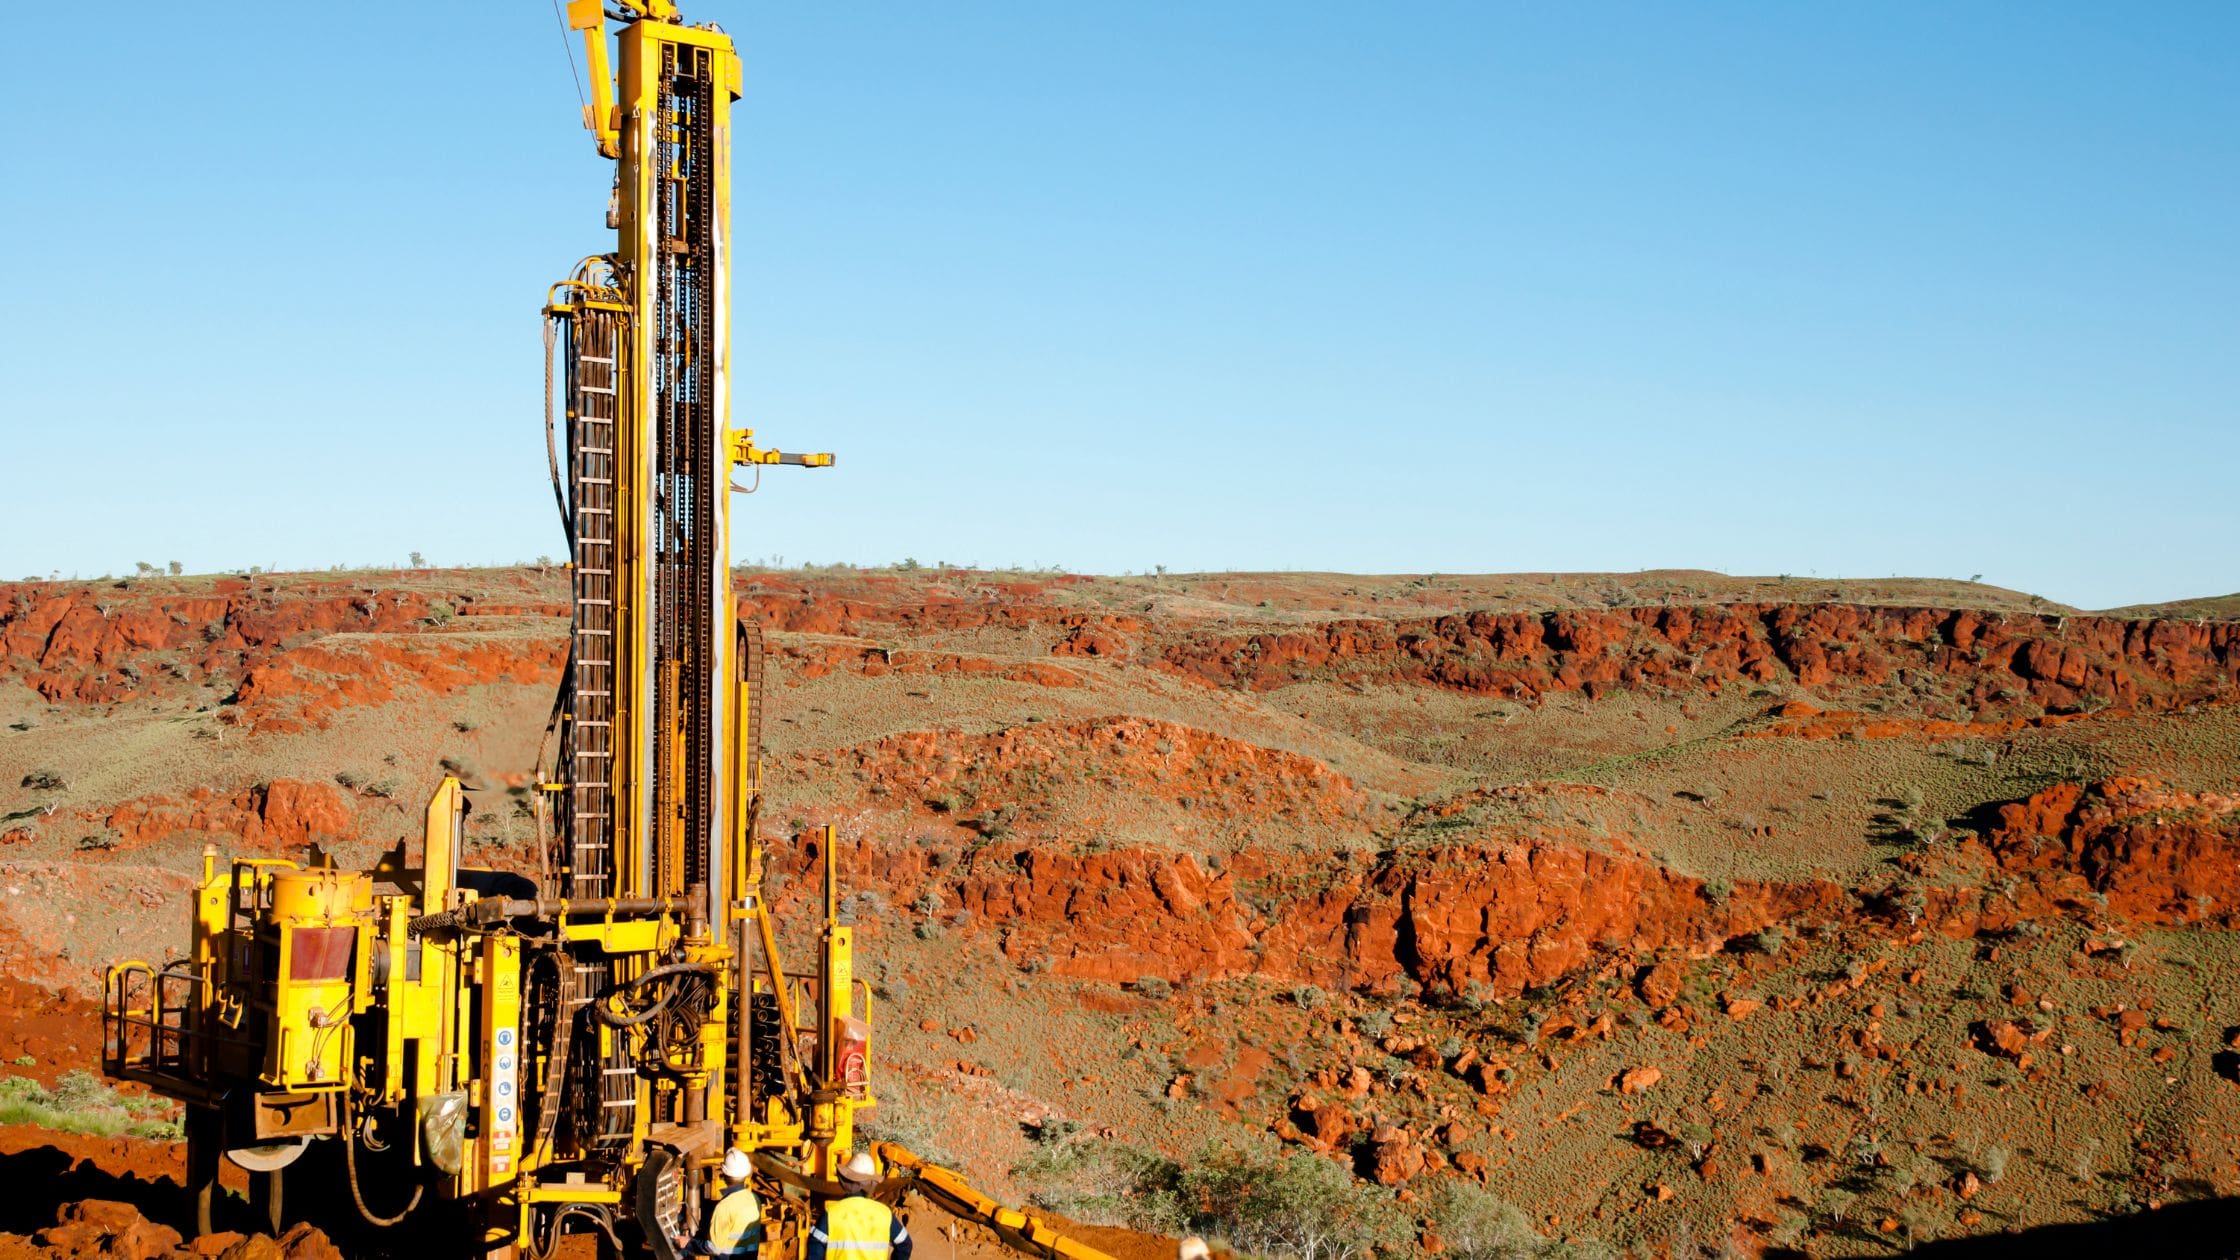 Who Owns Mineral Rights To My Property?